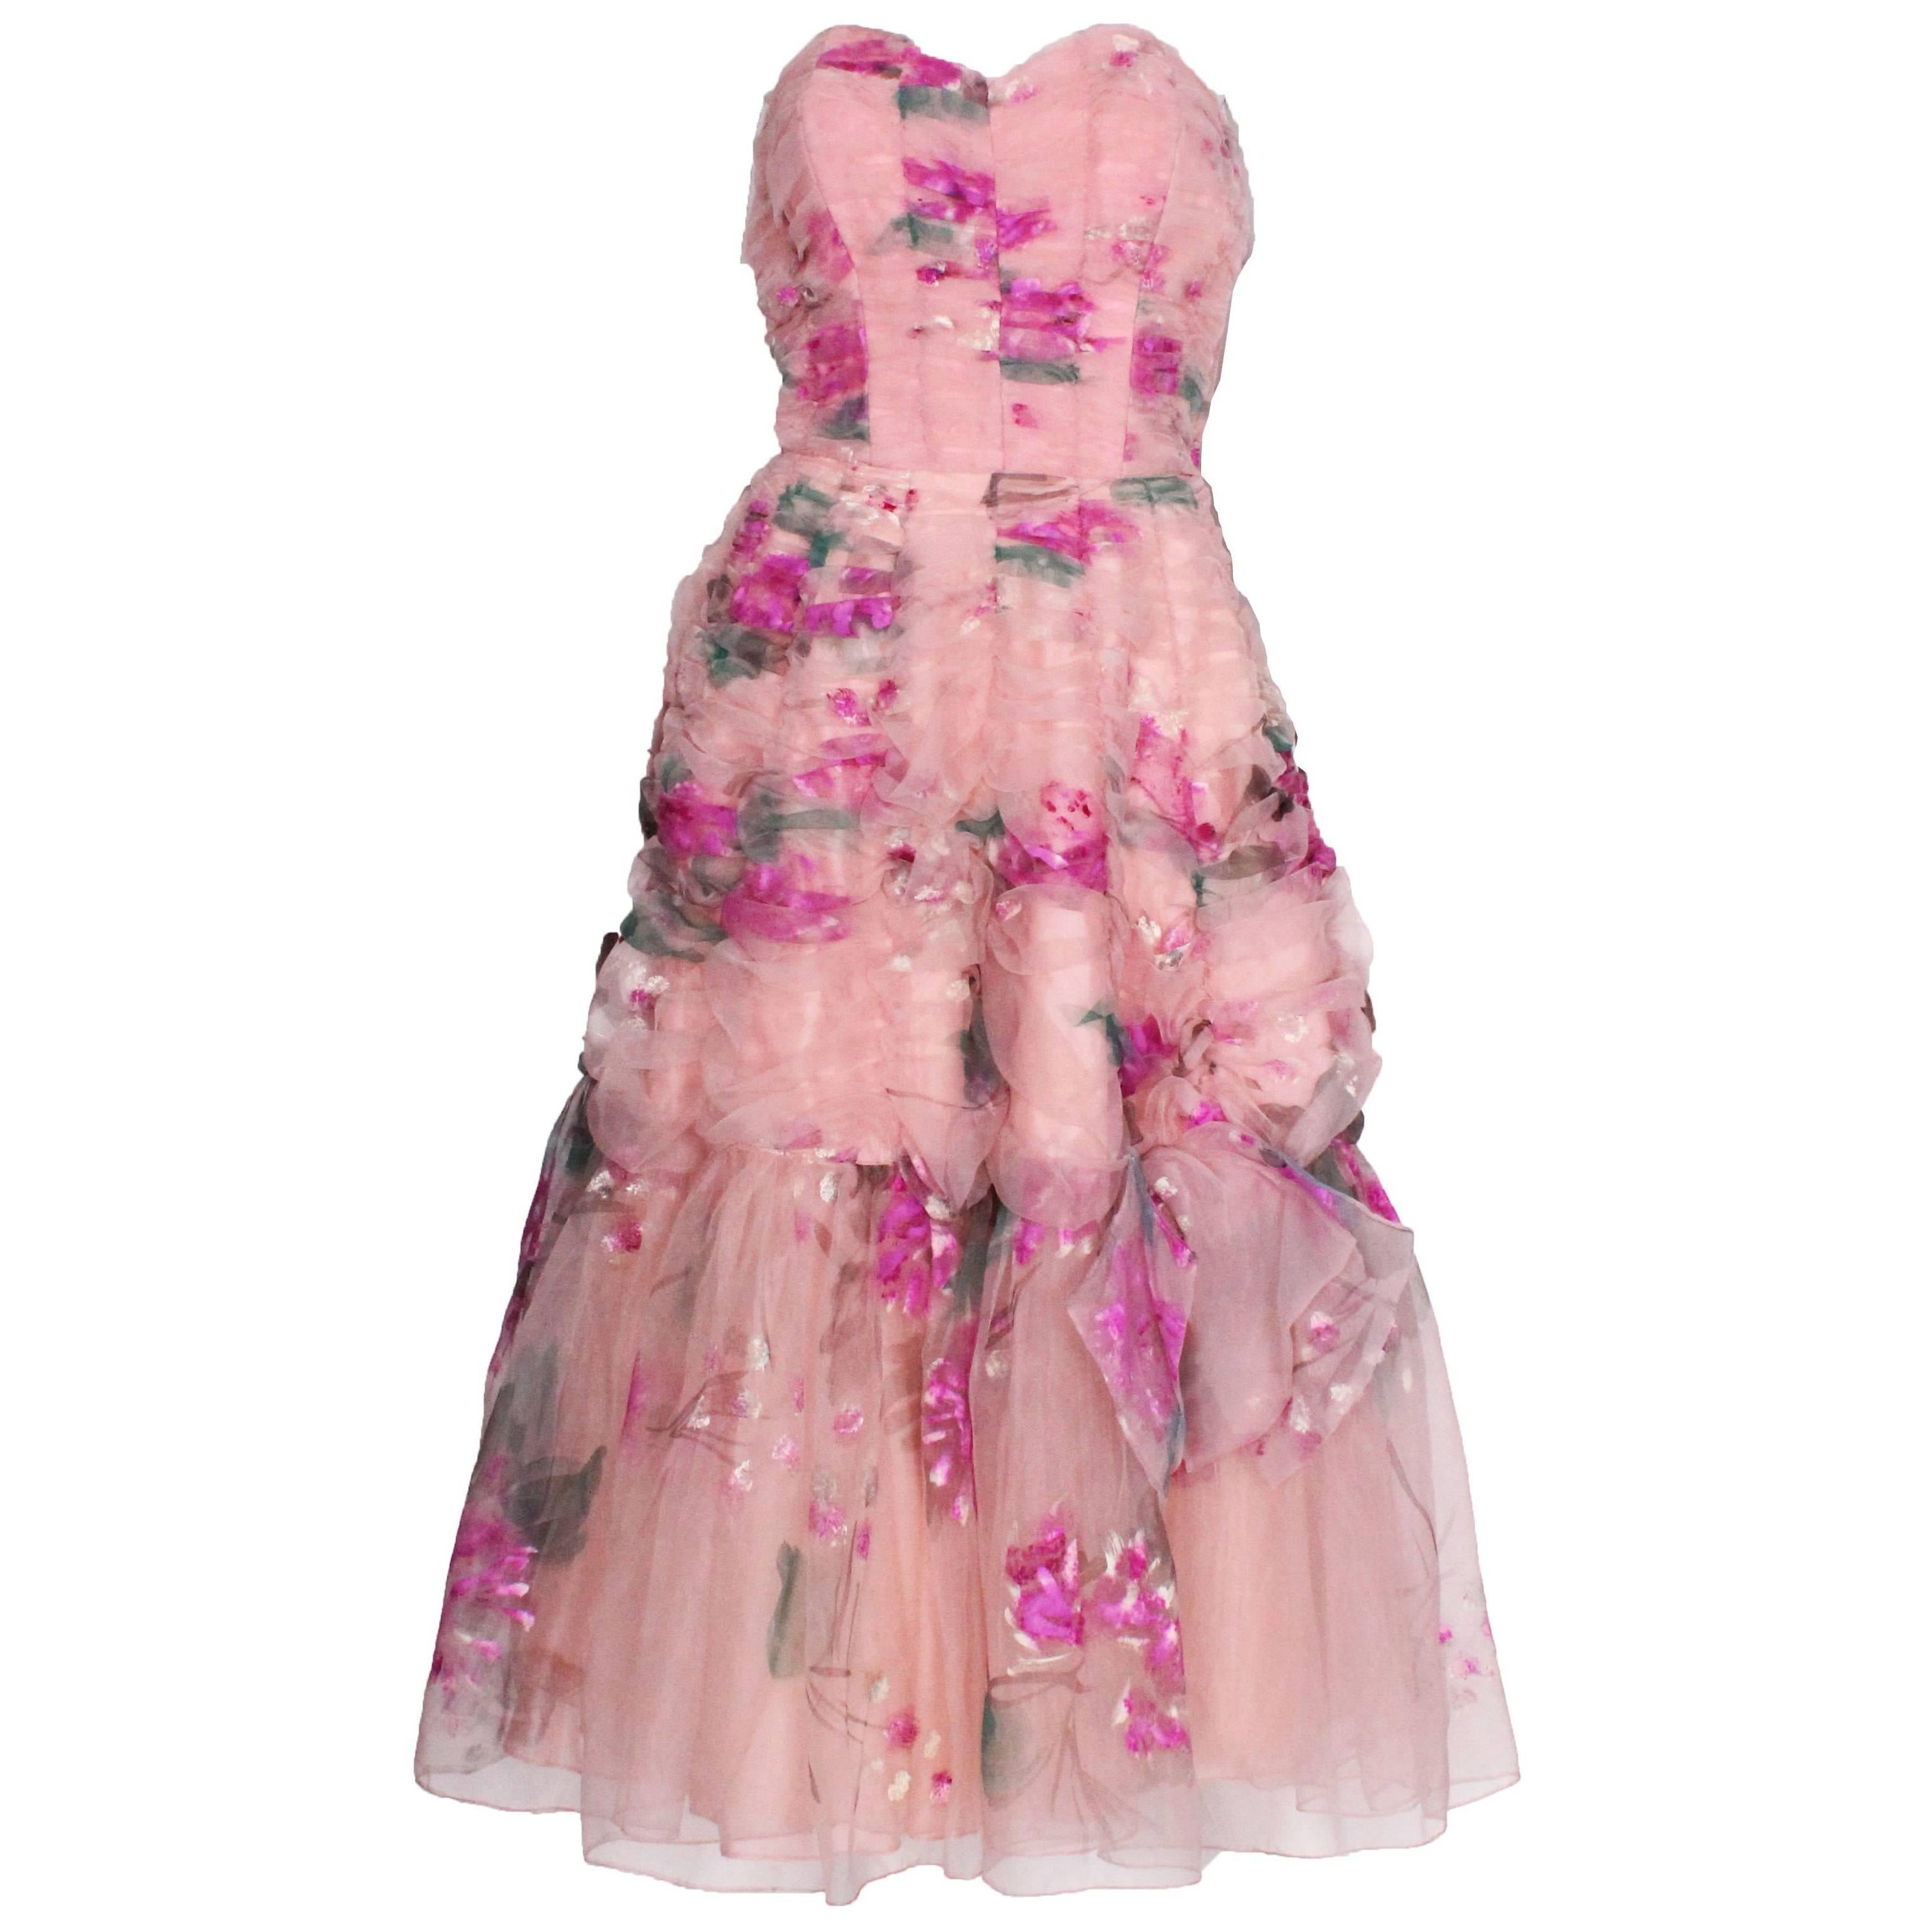 1950 Handpainted Floral Pink Party Dress